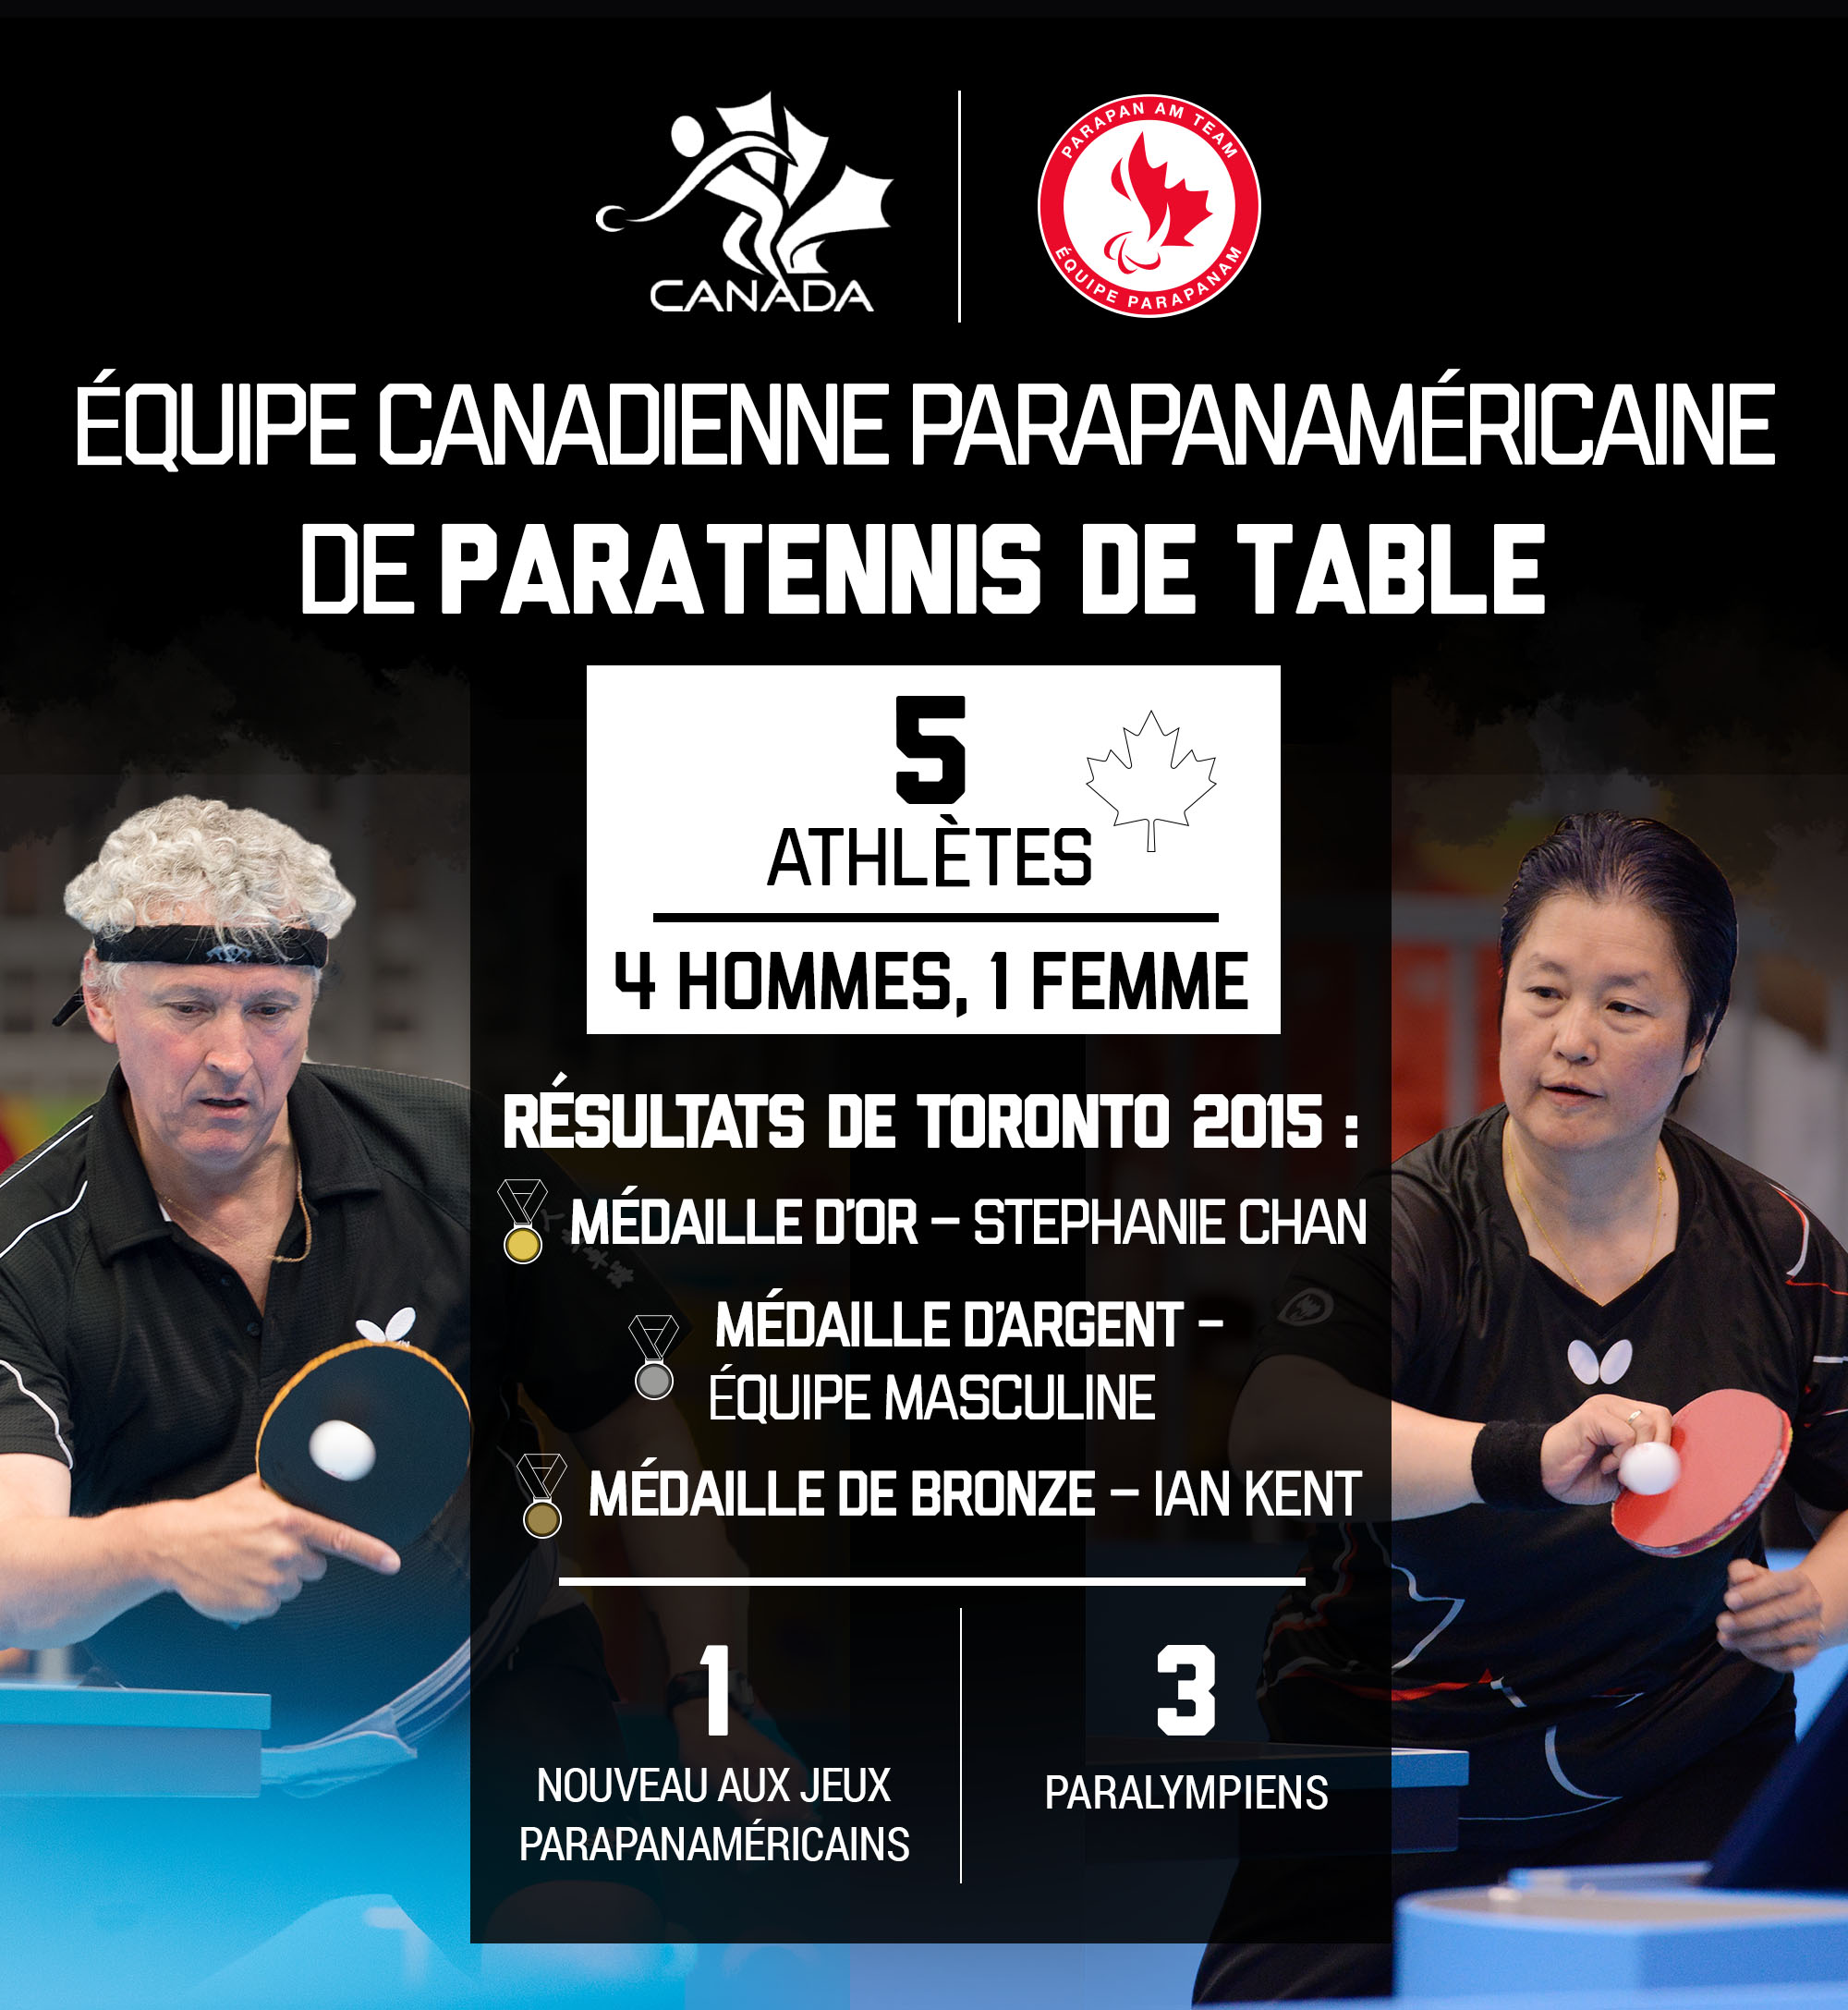 A graphic showing the make-up of the Canadian Parapan Am table tennis team